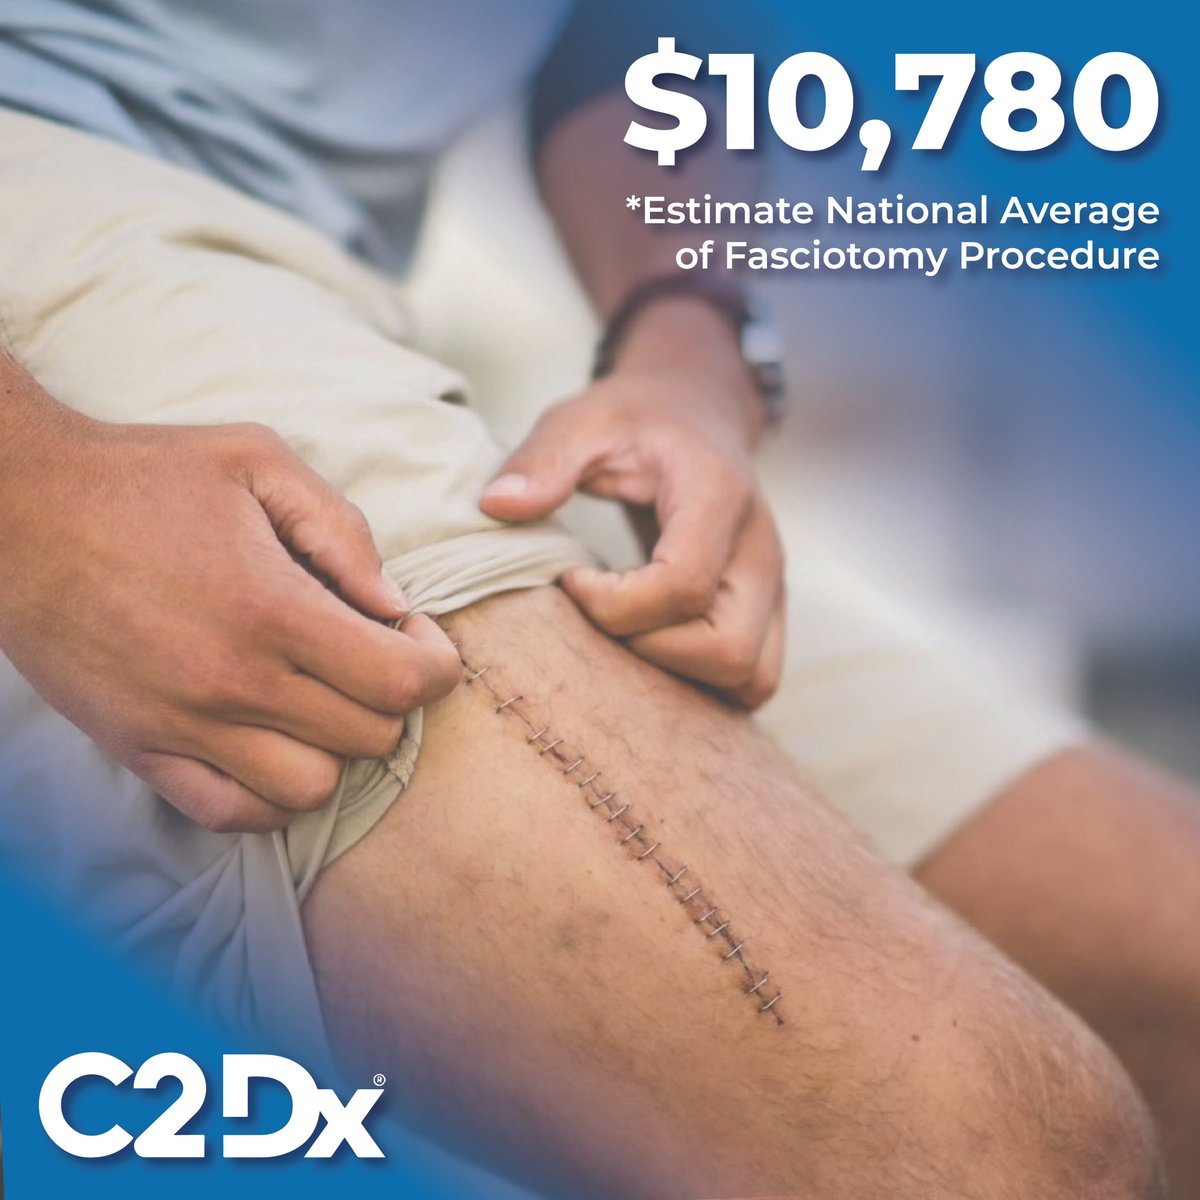 With the estimated cost for a fasciotomy at over $10,000, increasing patient awareness is crucial. 

Learn more about acute compartment syndrome pathophysiology, diagnosis, and management in this new white paper: scnv.io/ACSWhitePaper 

#C2Dx #CompartmentSyndrome #Fasciotomy